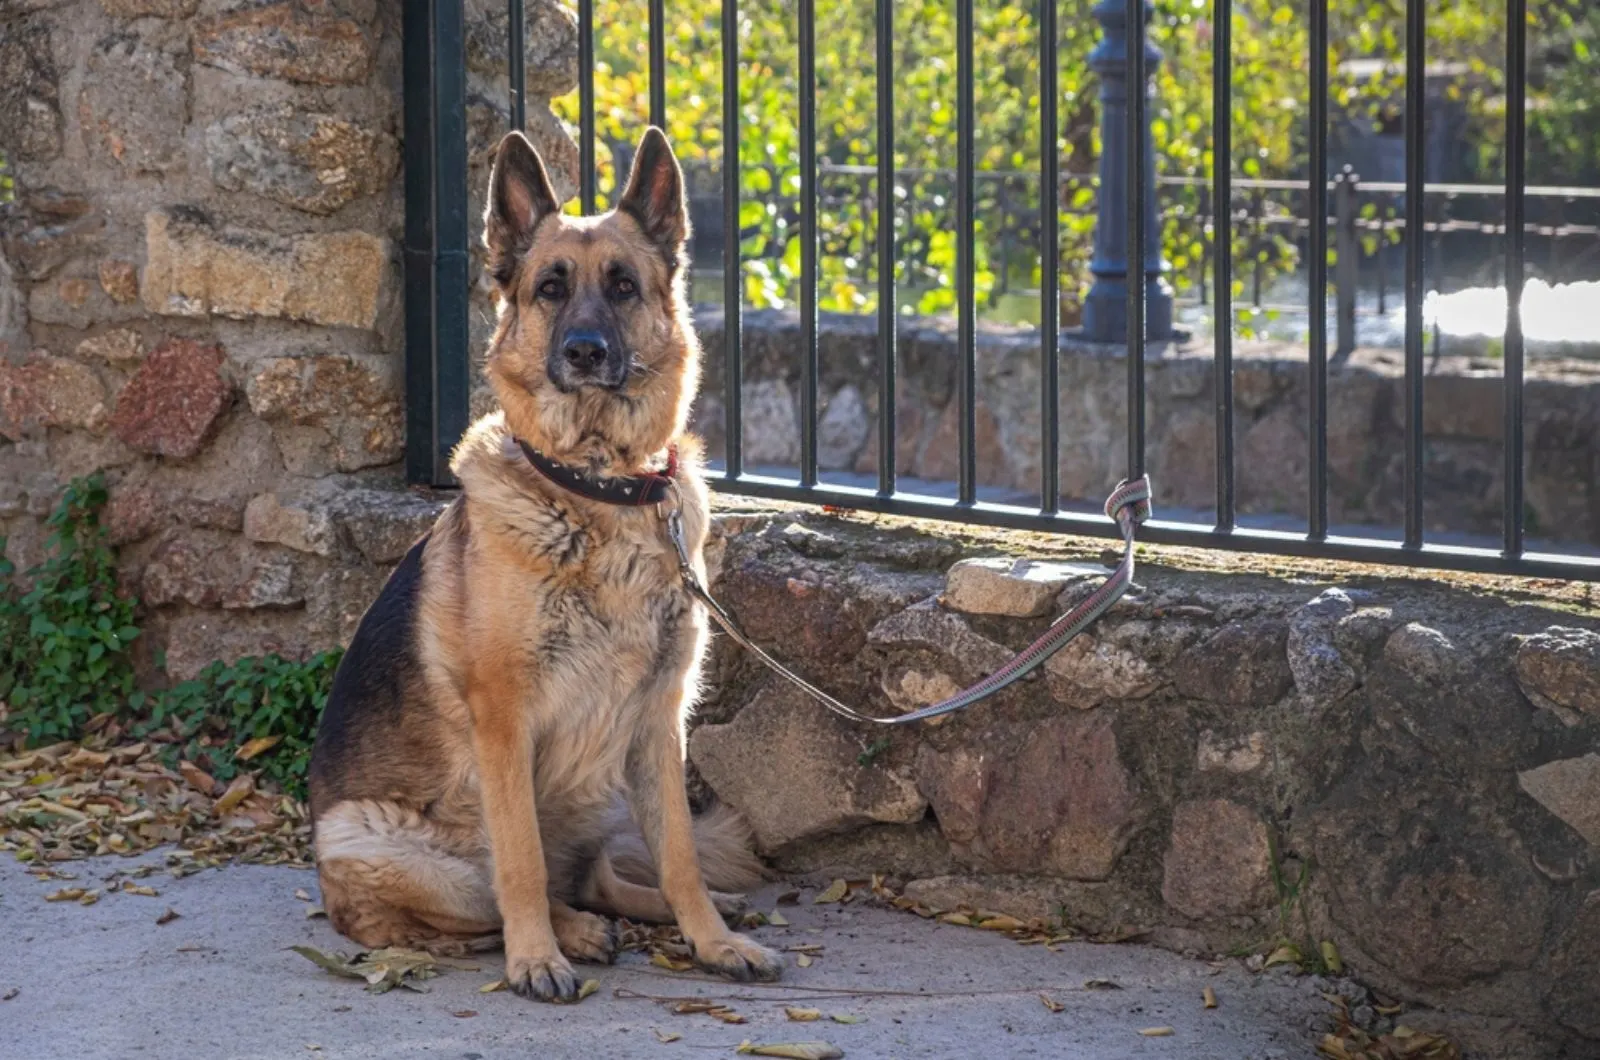 german shepherd dog sitting on the ground tied to a metal fence